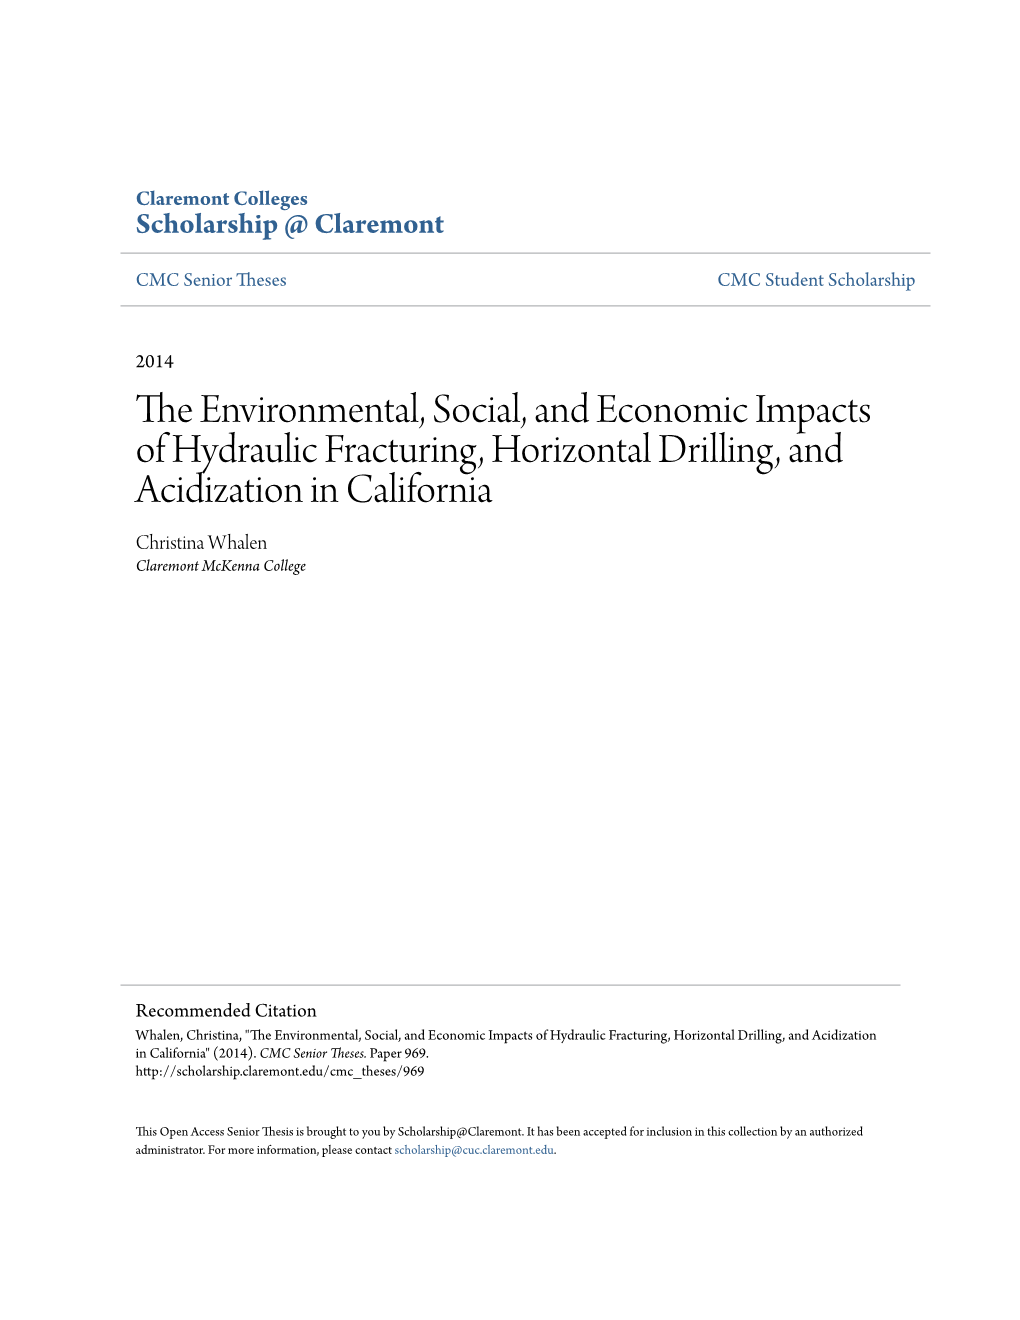 The Environmental, Social, and Economic Impacts of Hydraulic